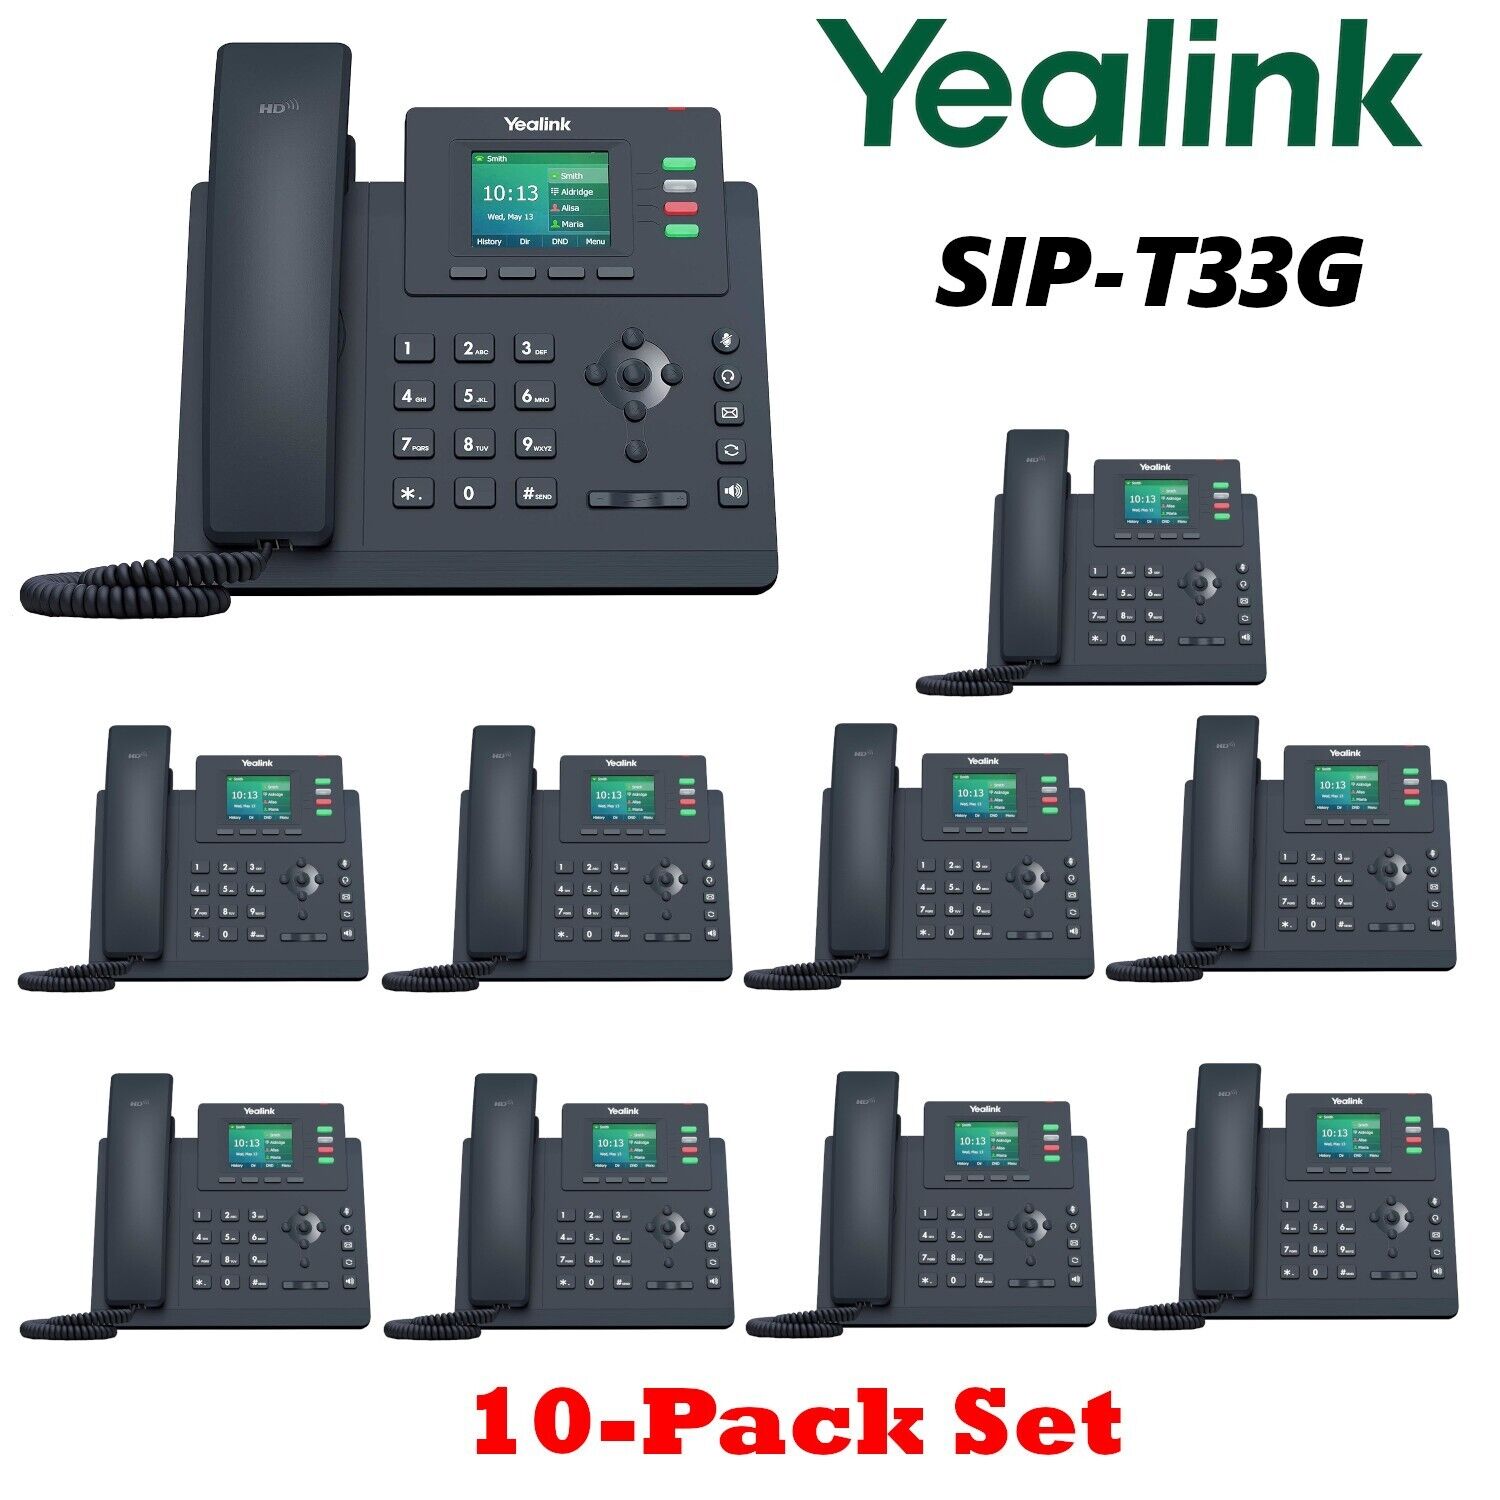 10 Yealink SIP-T33G Gigabit PoE Color LCD 4-Line Office Phone Entry Level T33G